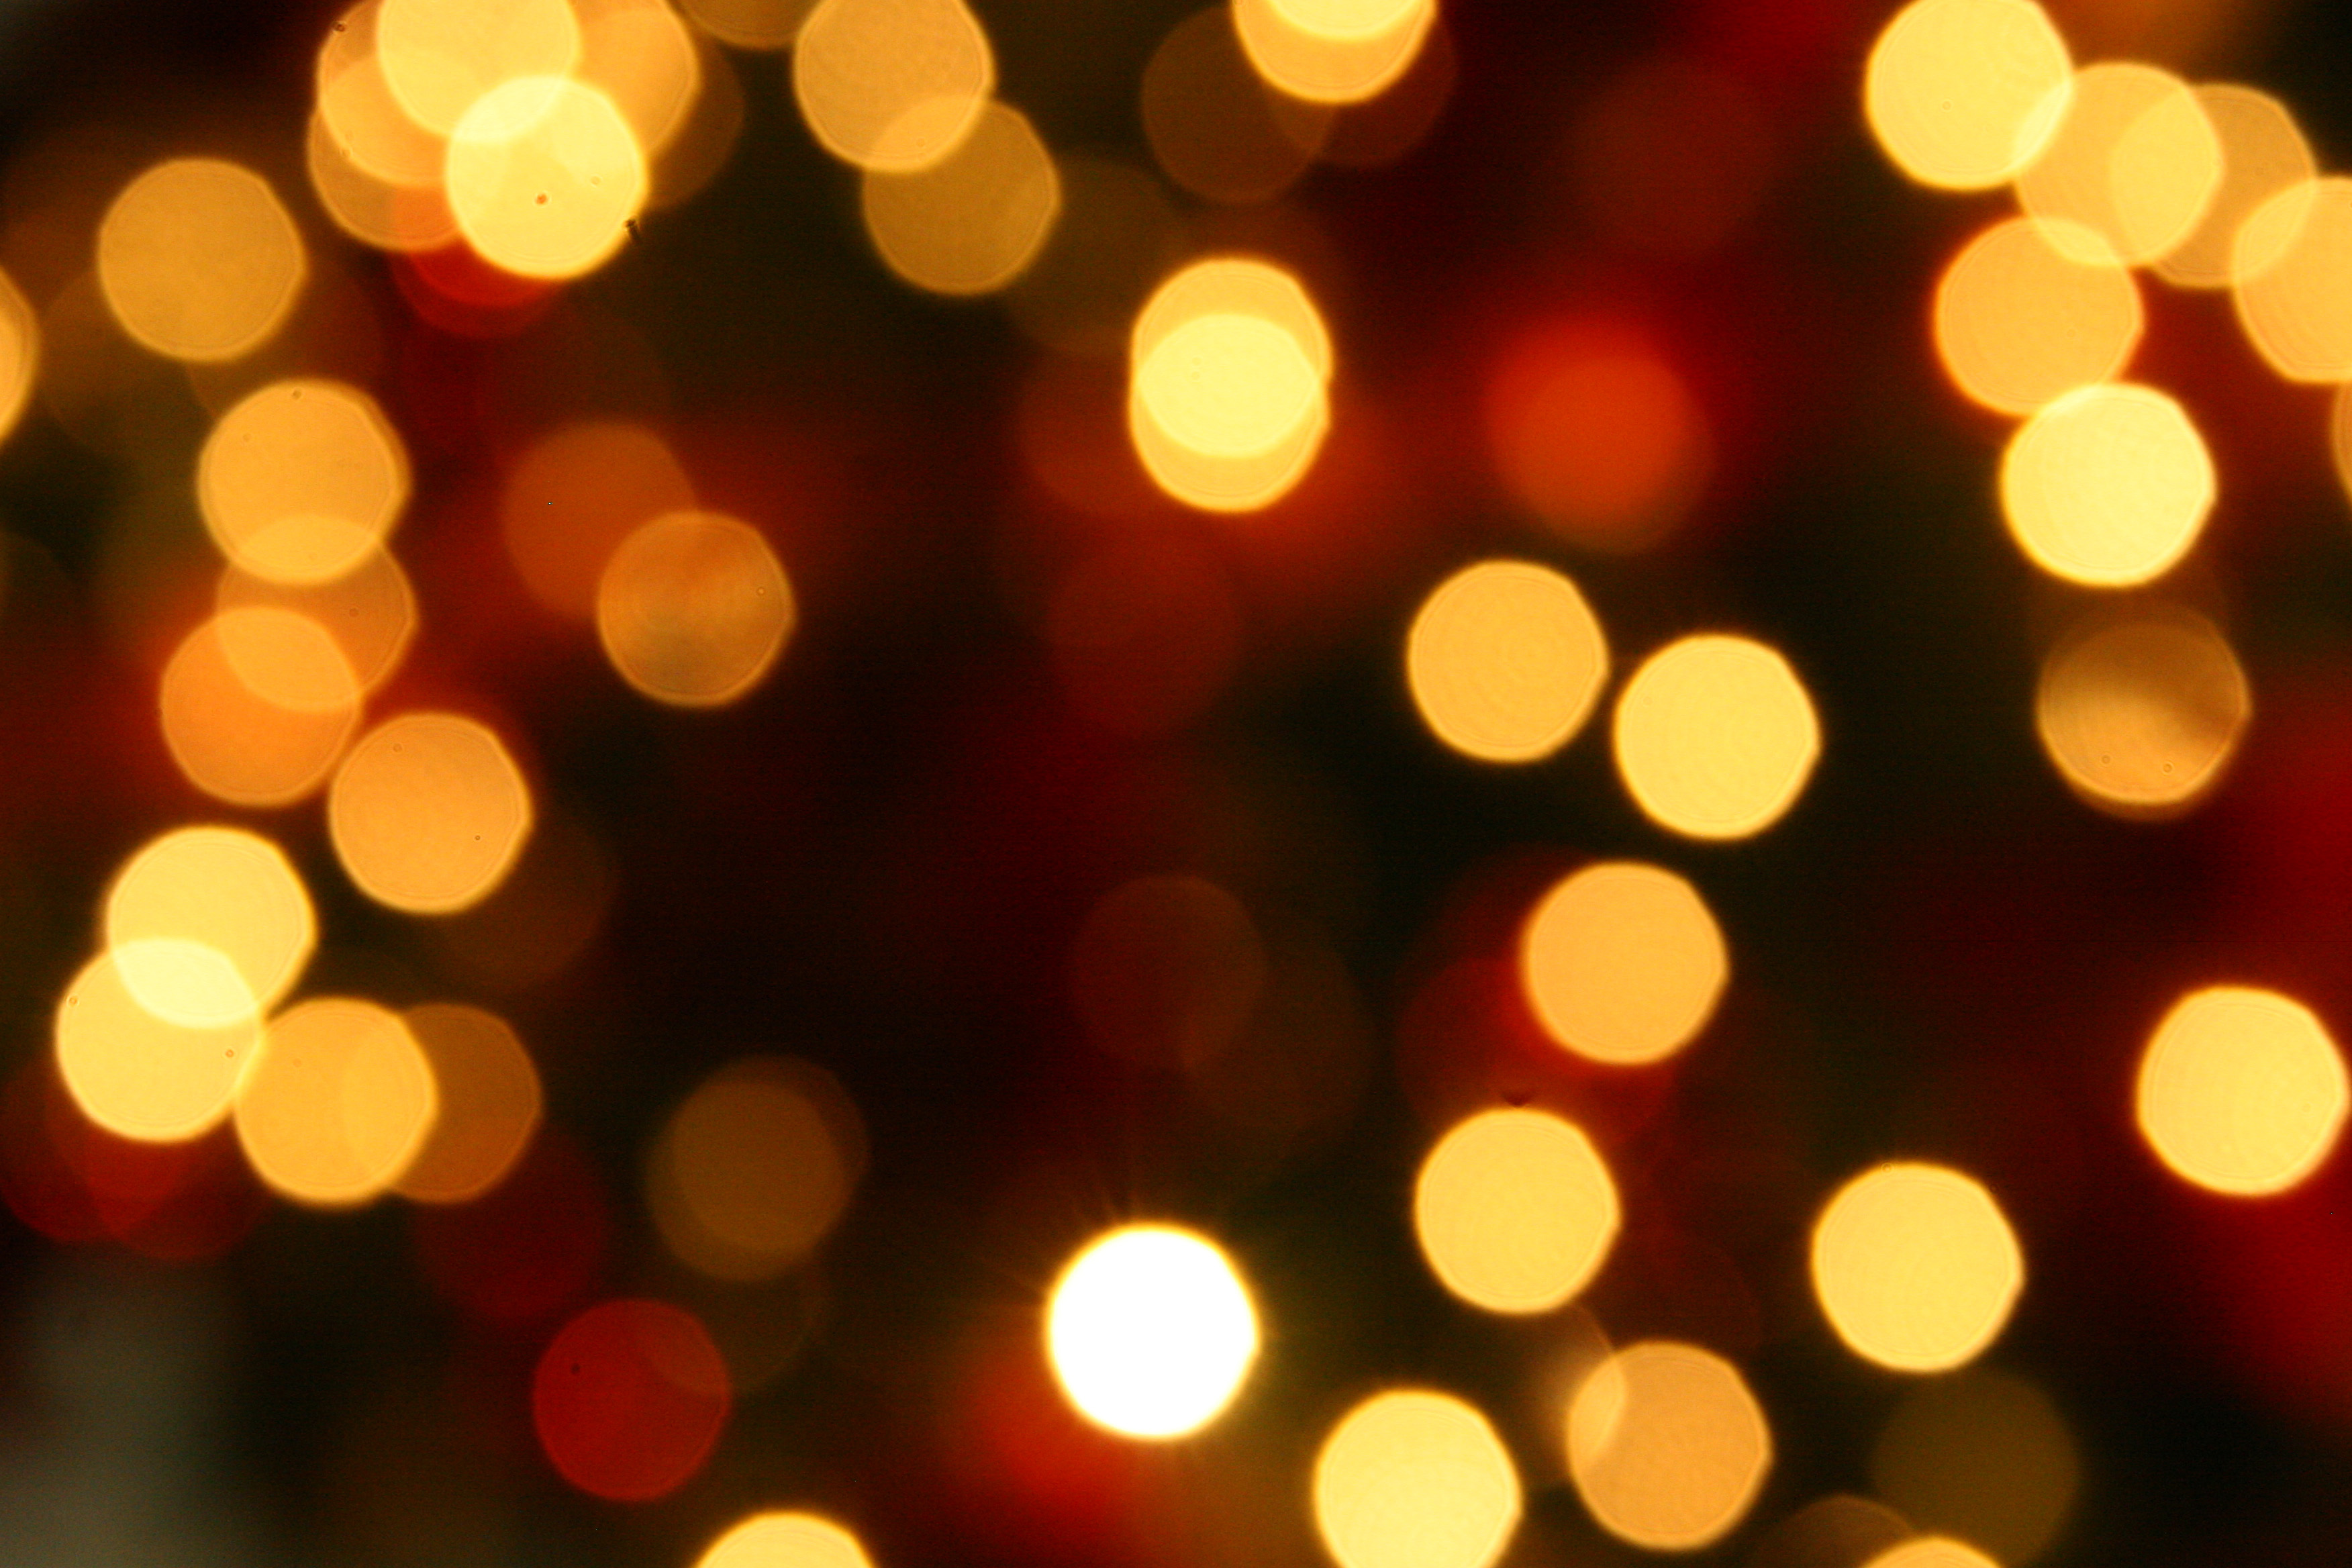 Free Christmas background images at Youth Ministry TV